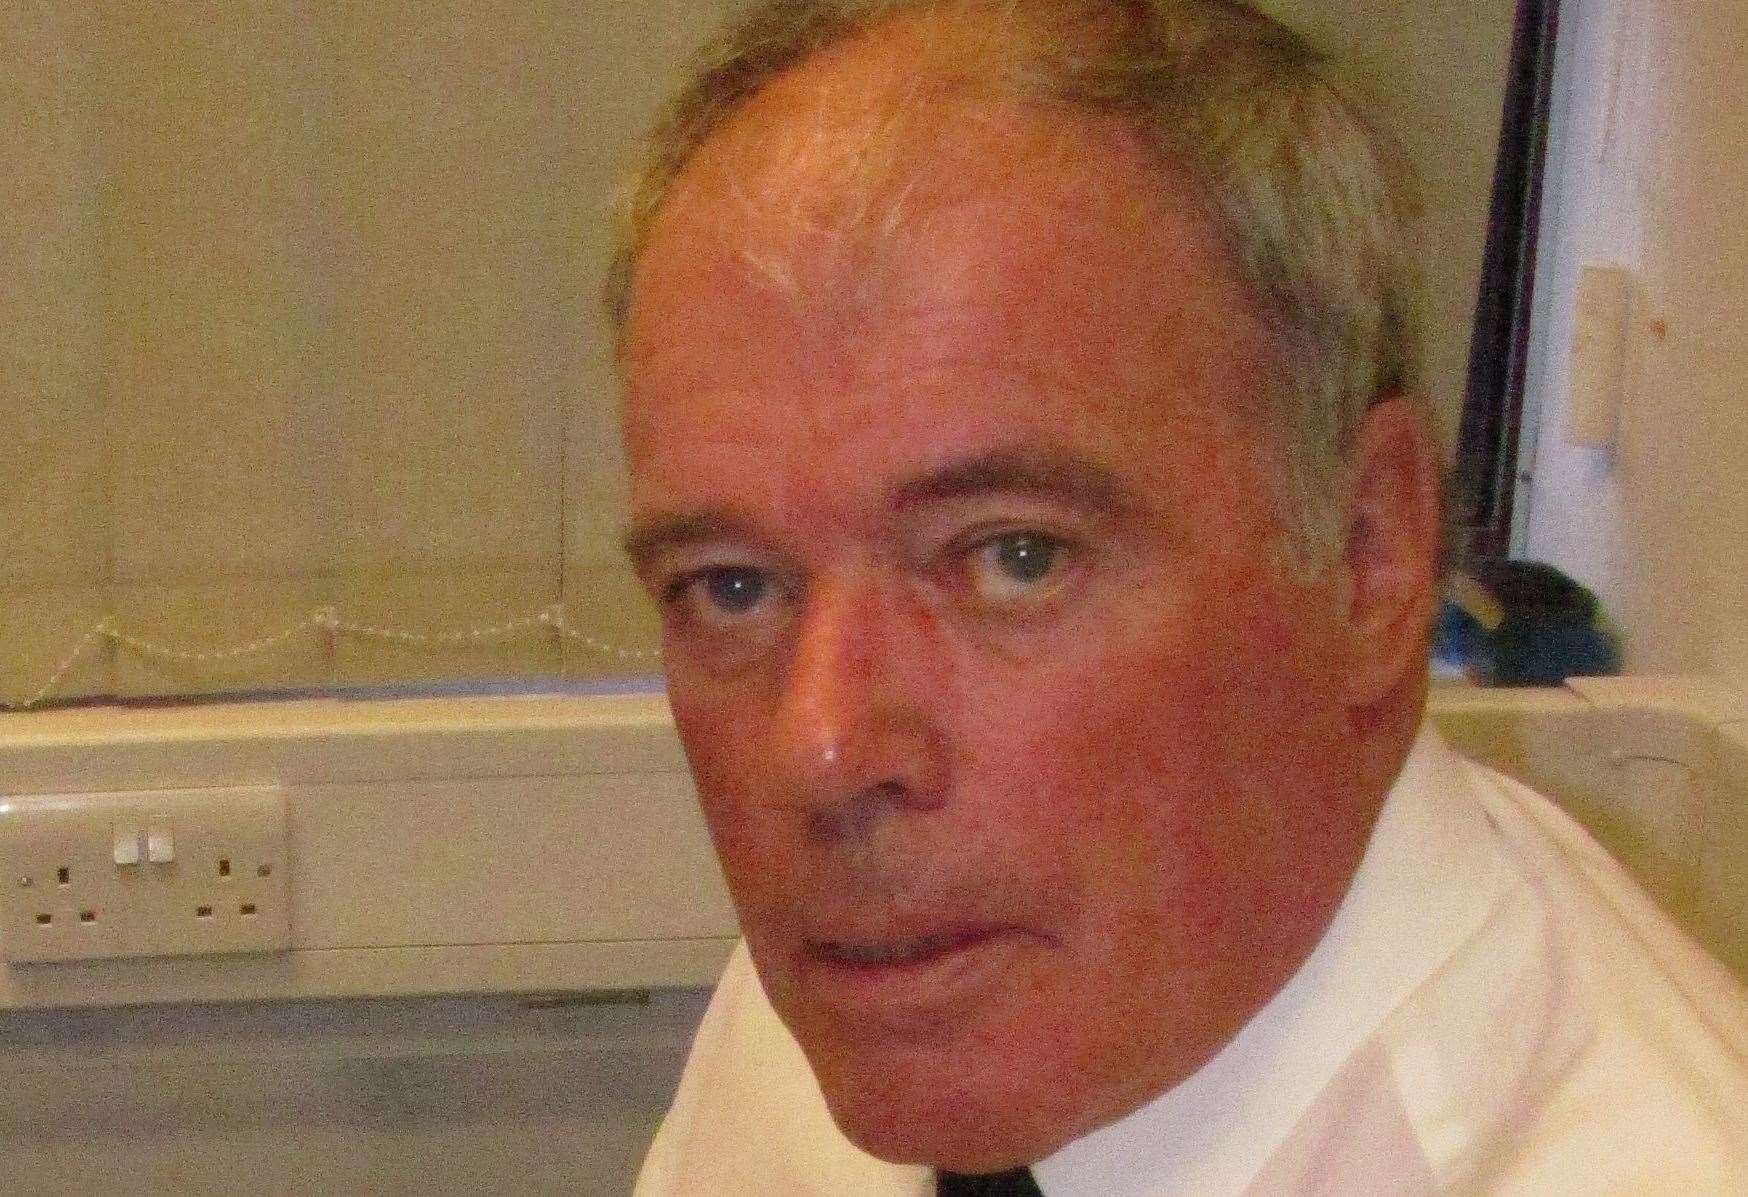 Retired Det Supt Nick Biddiss - the man who arrested Noye for the M25 murder of Stephen Cameron